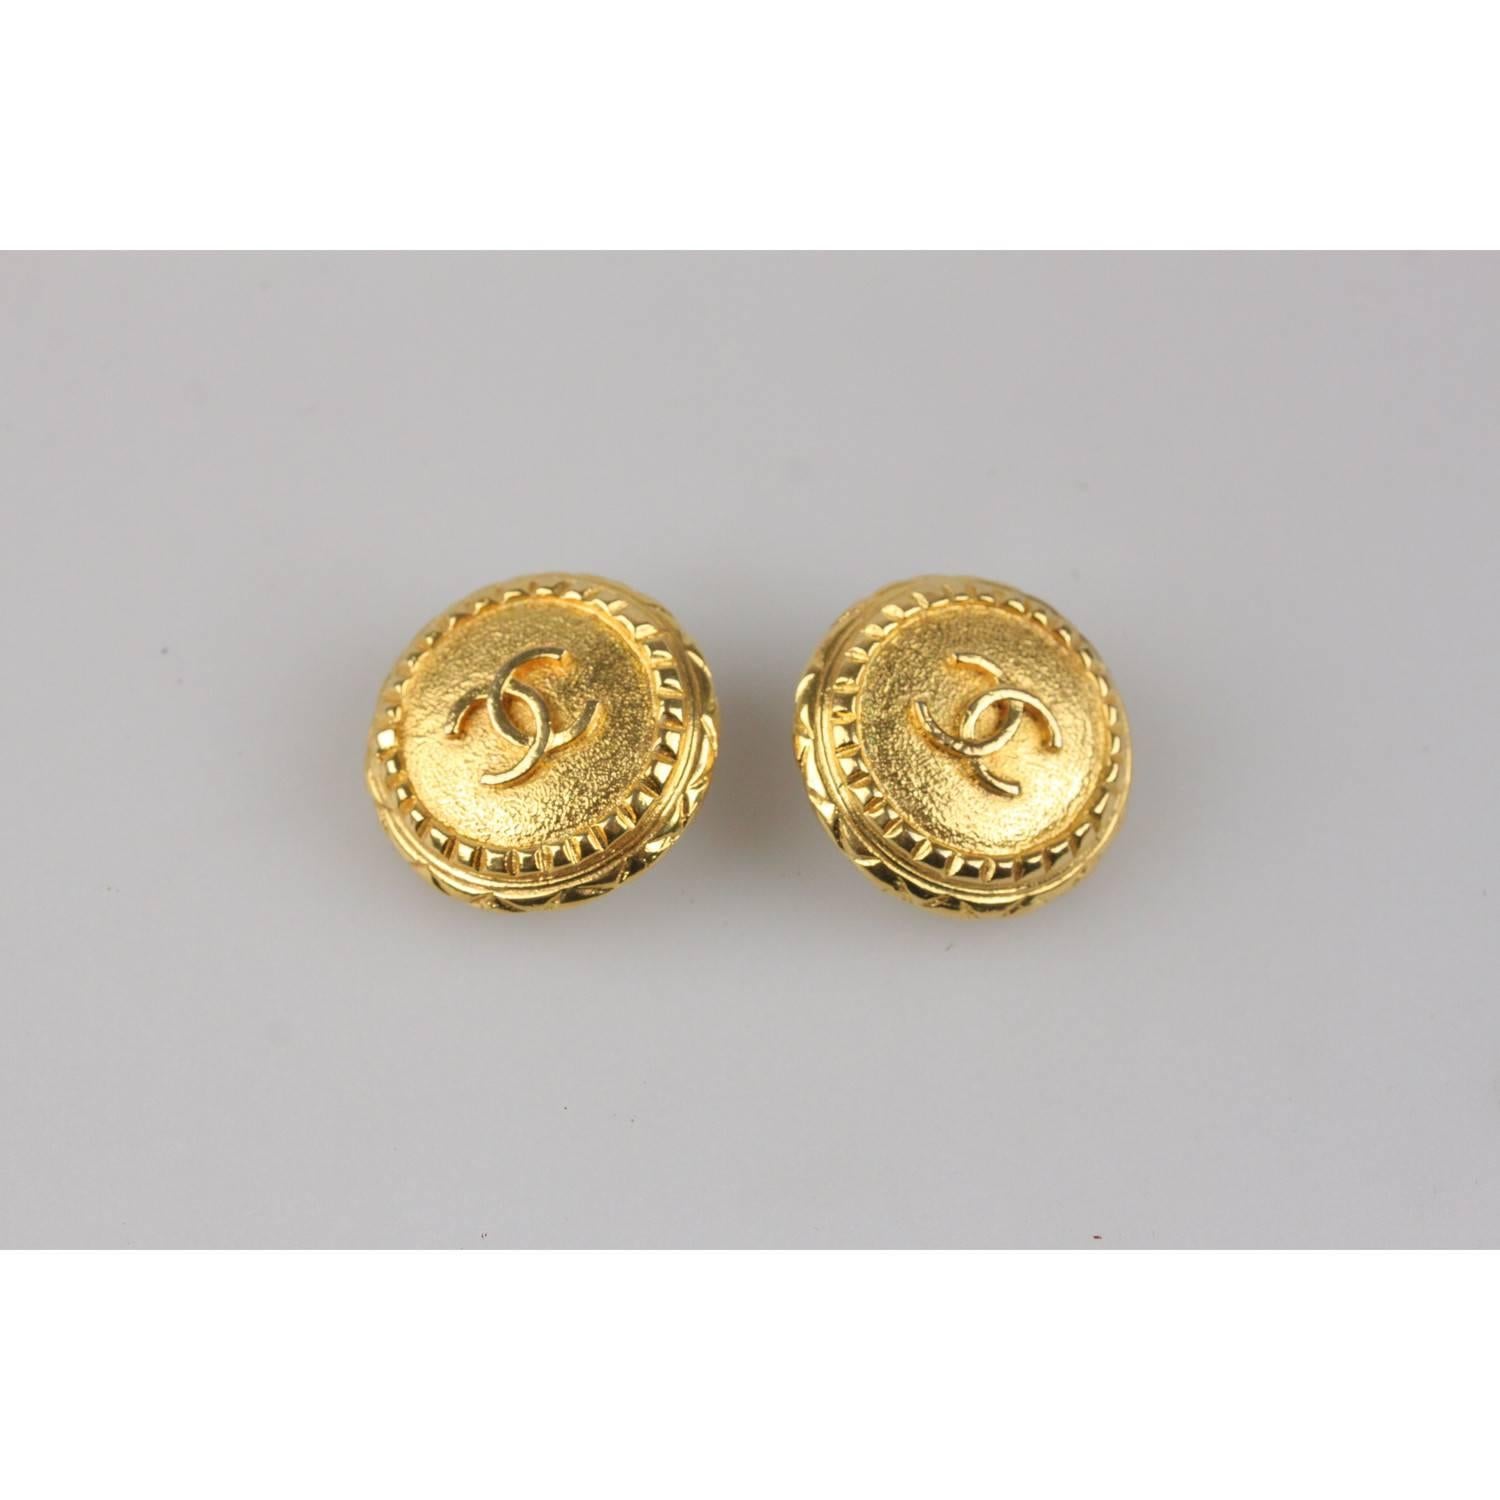 Vintage Round clip on logo earrings in gold metal by CHANEL.  'CHANEL - CC  - Made in France' round tag on the reverse of the earrings. 
